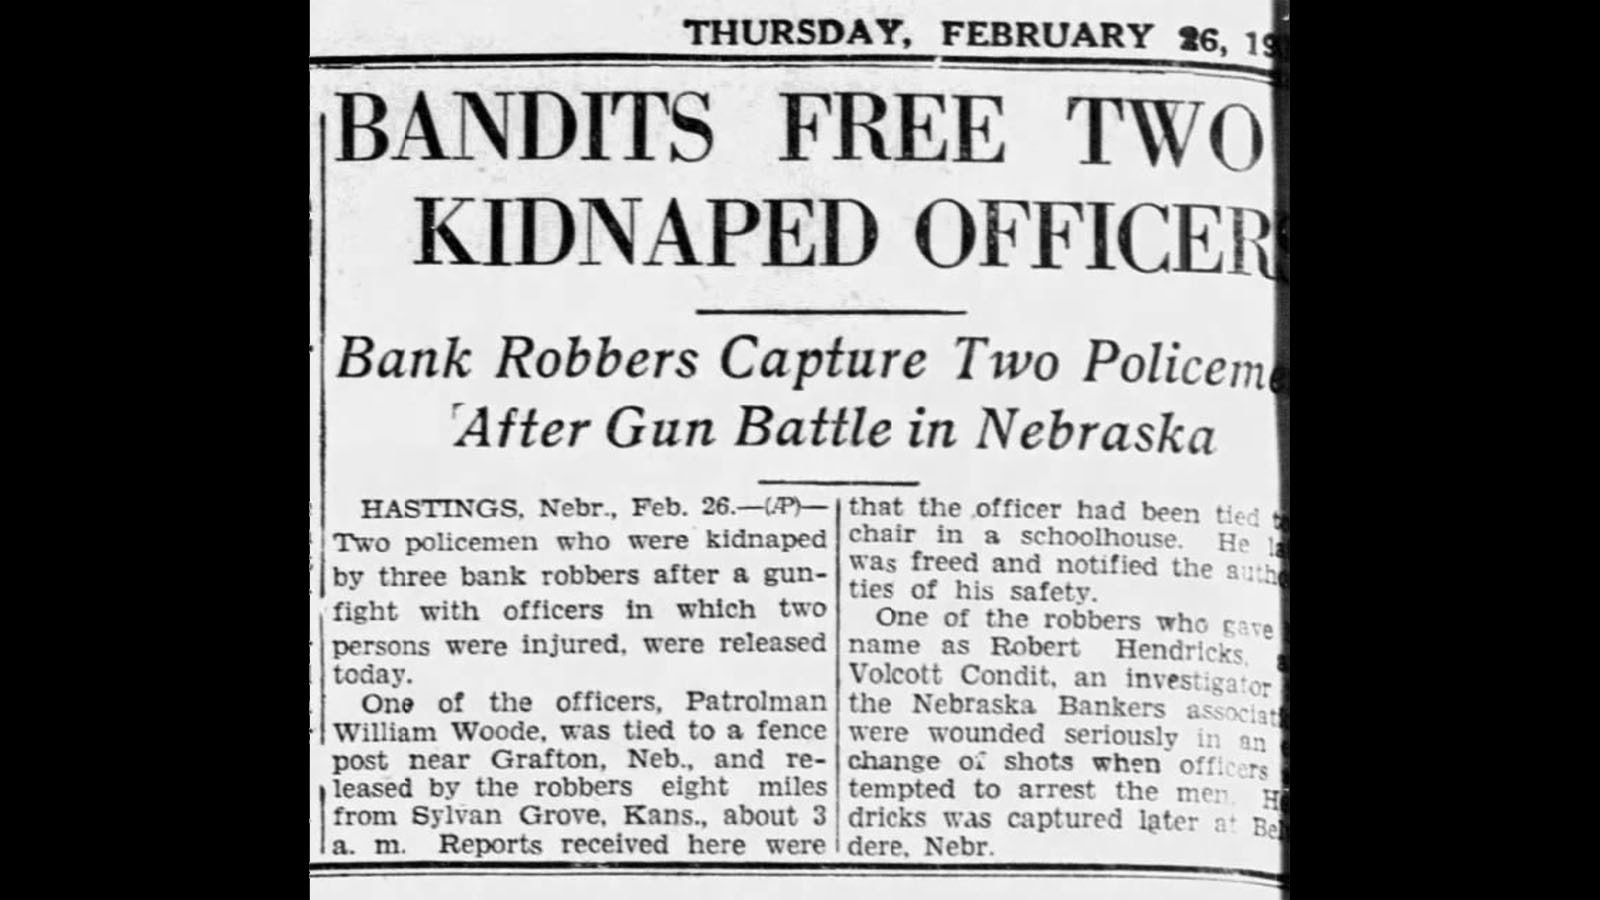 Newspapers during the depression had many headlines related to banks. Here is one from the Casper Tribune Herald in 1930.